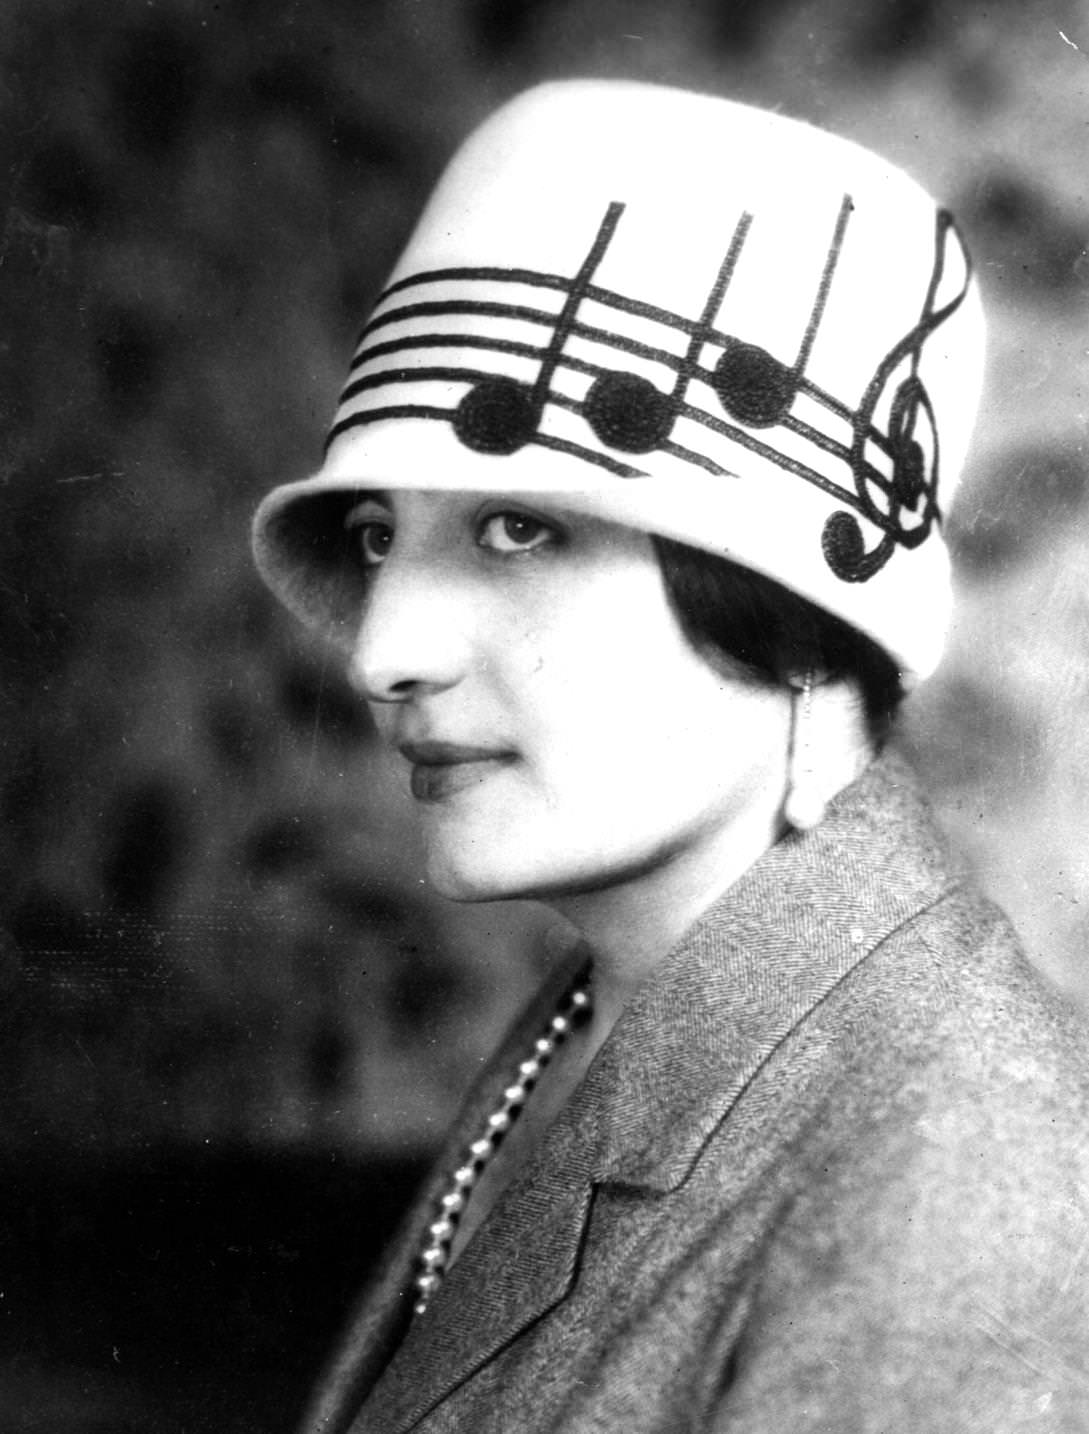 A novelty hat with musical notes embroidered on, created for a famous operatic star, 1925